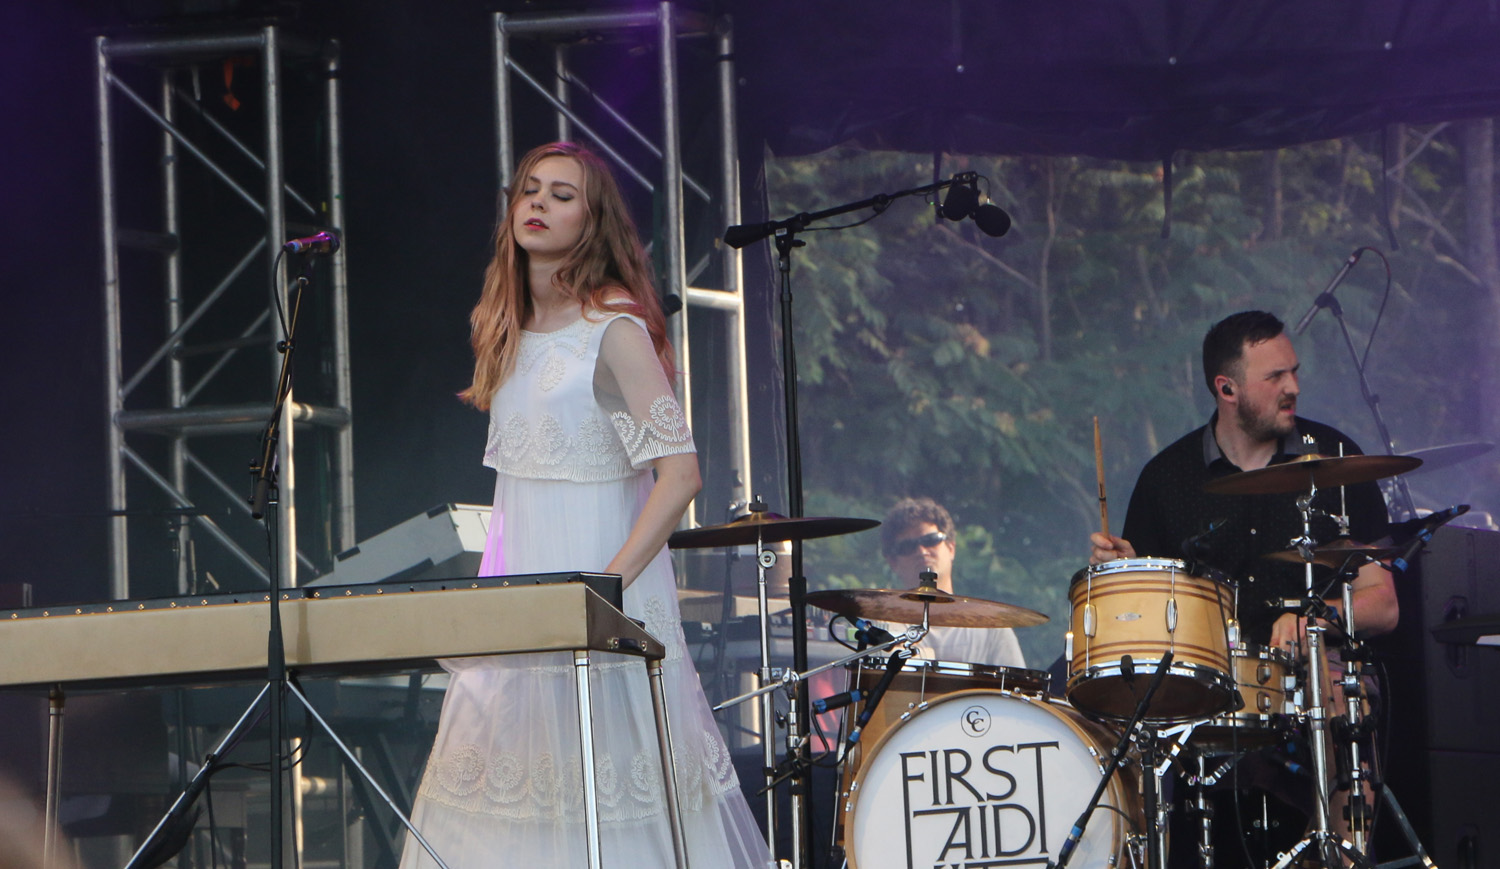 Johanna Söderberg, left, and Scott Simpson, right, of First Aid Kit perform at the Sloss Music & Arts Festival in Birmingham, Ala., on Saturday, July 18, 2015. (MTSU Sidelines / John Connor Coulston)